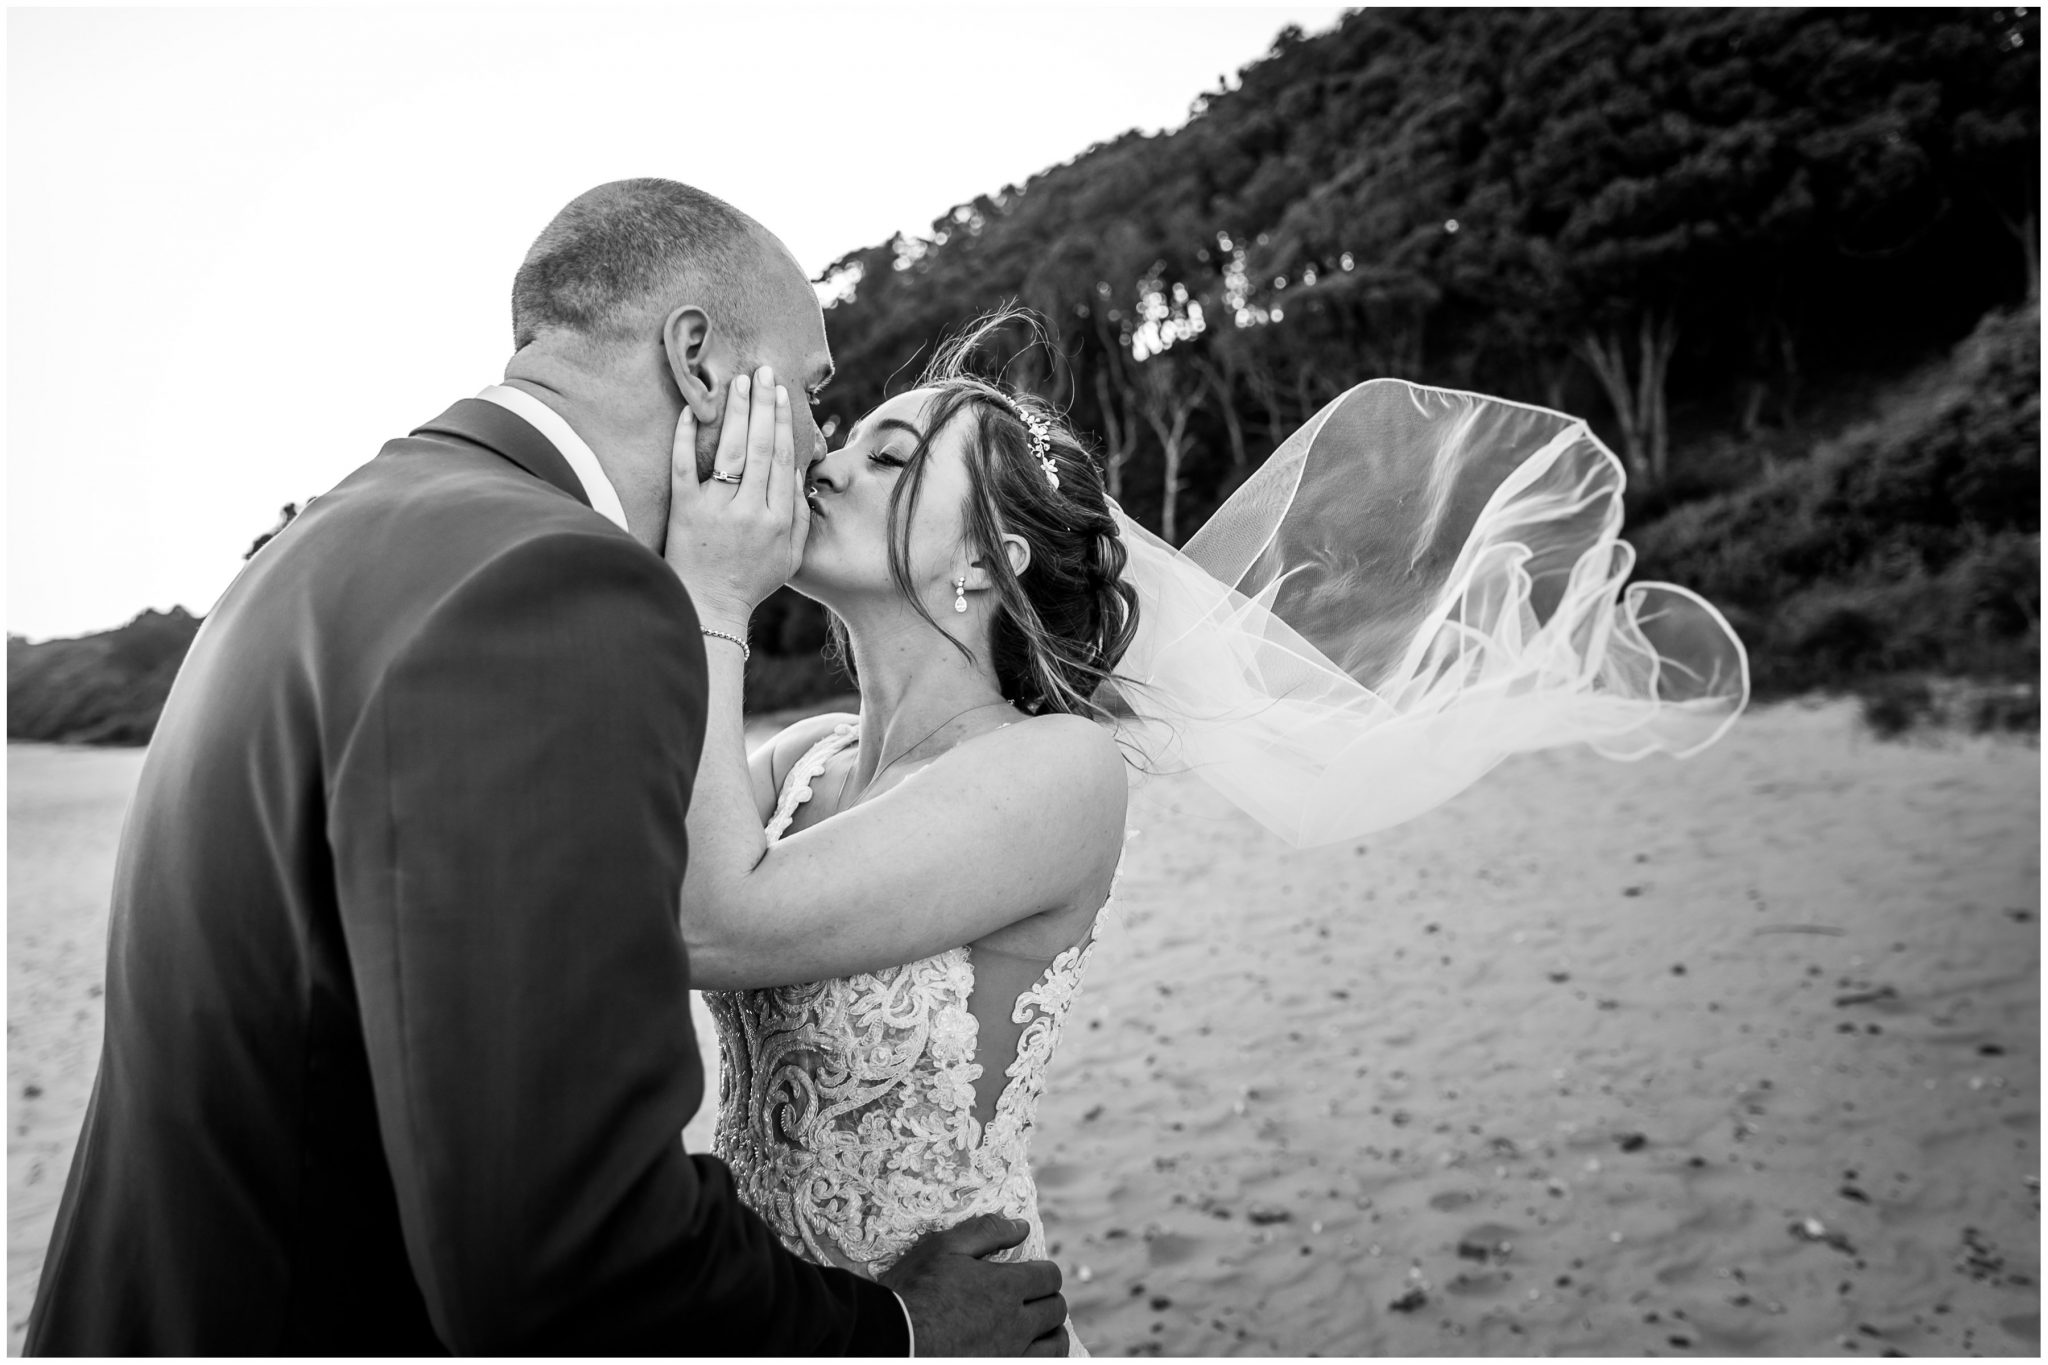 The couple kiss as the wind blows the veil on Highcliffe Beach Hampshire, black and white photograph